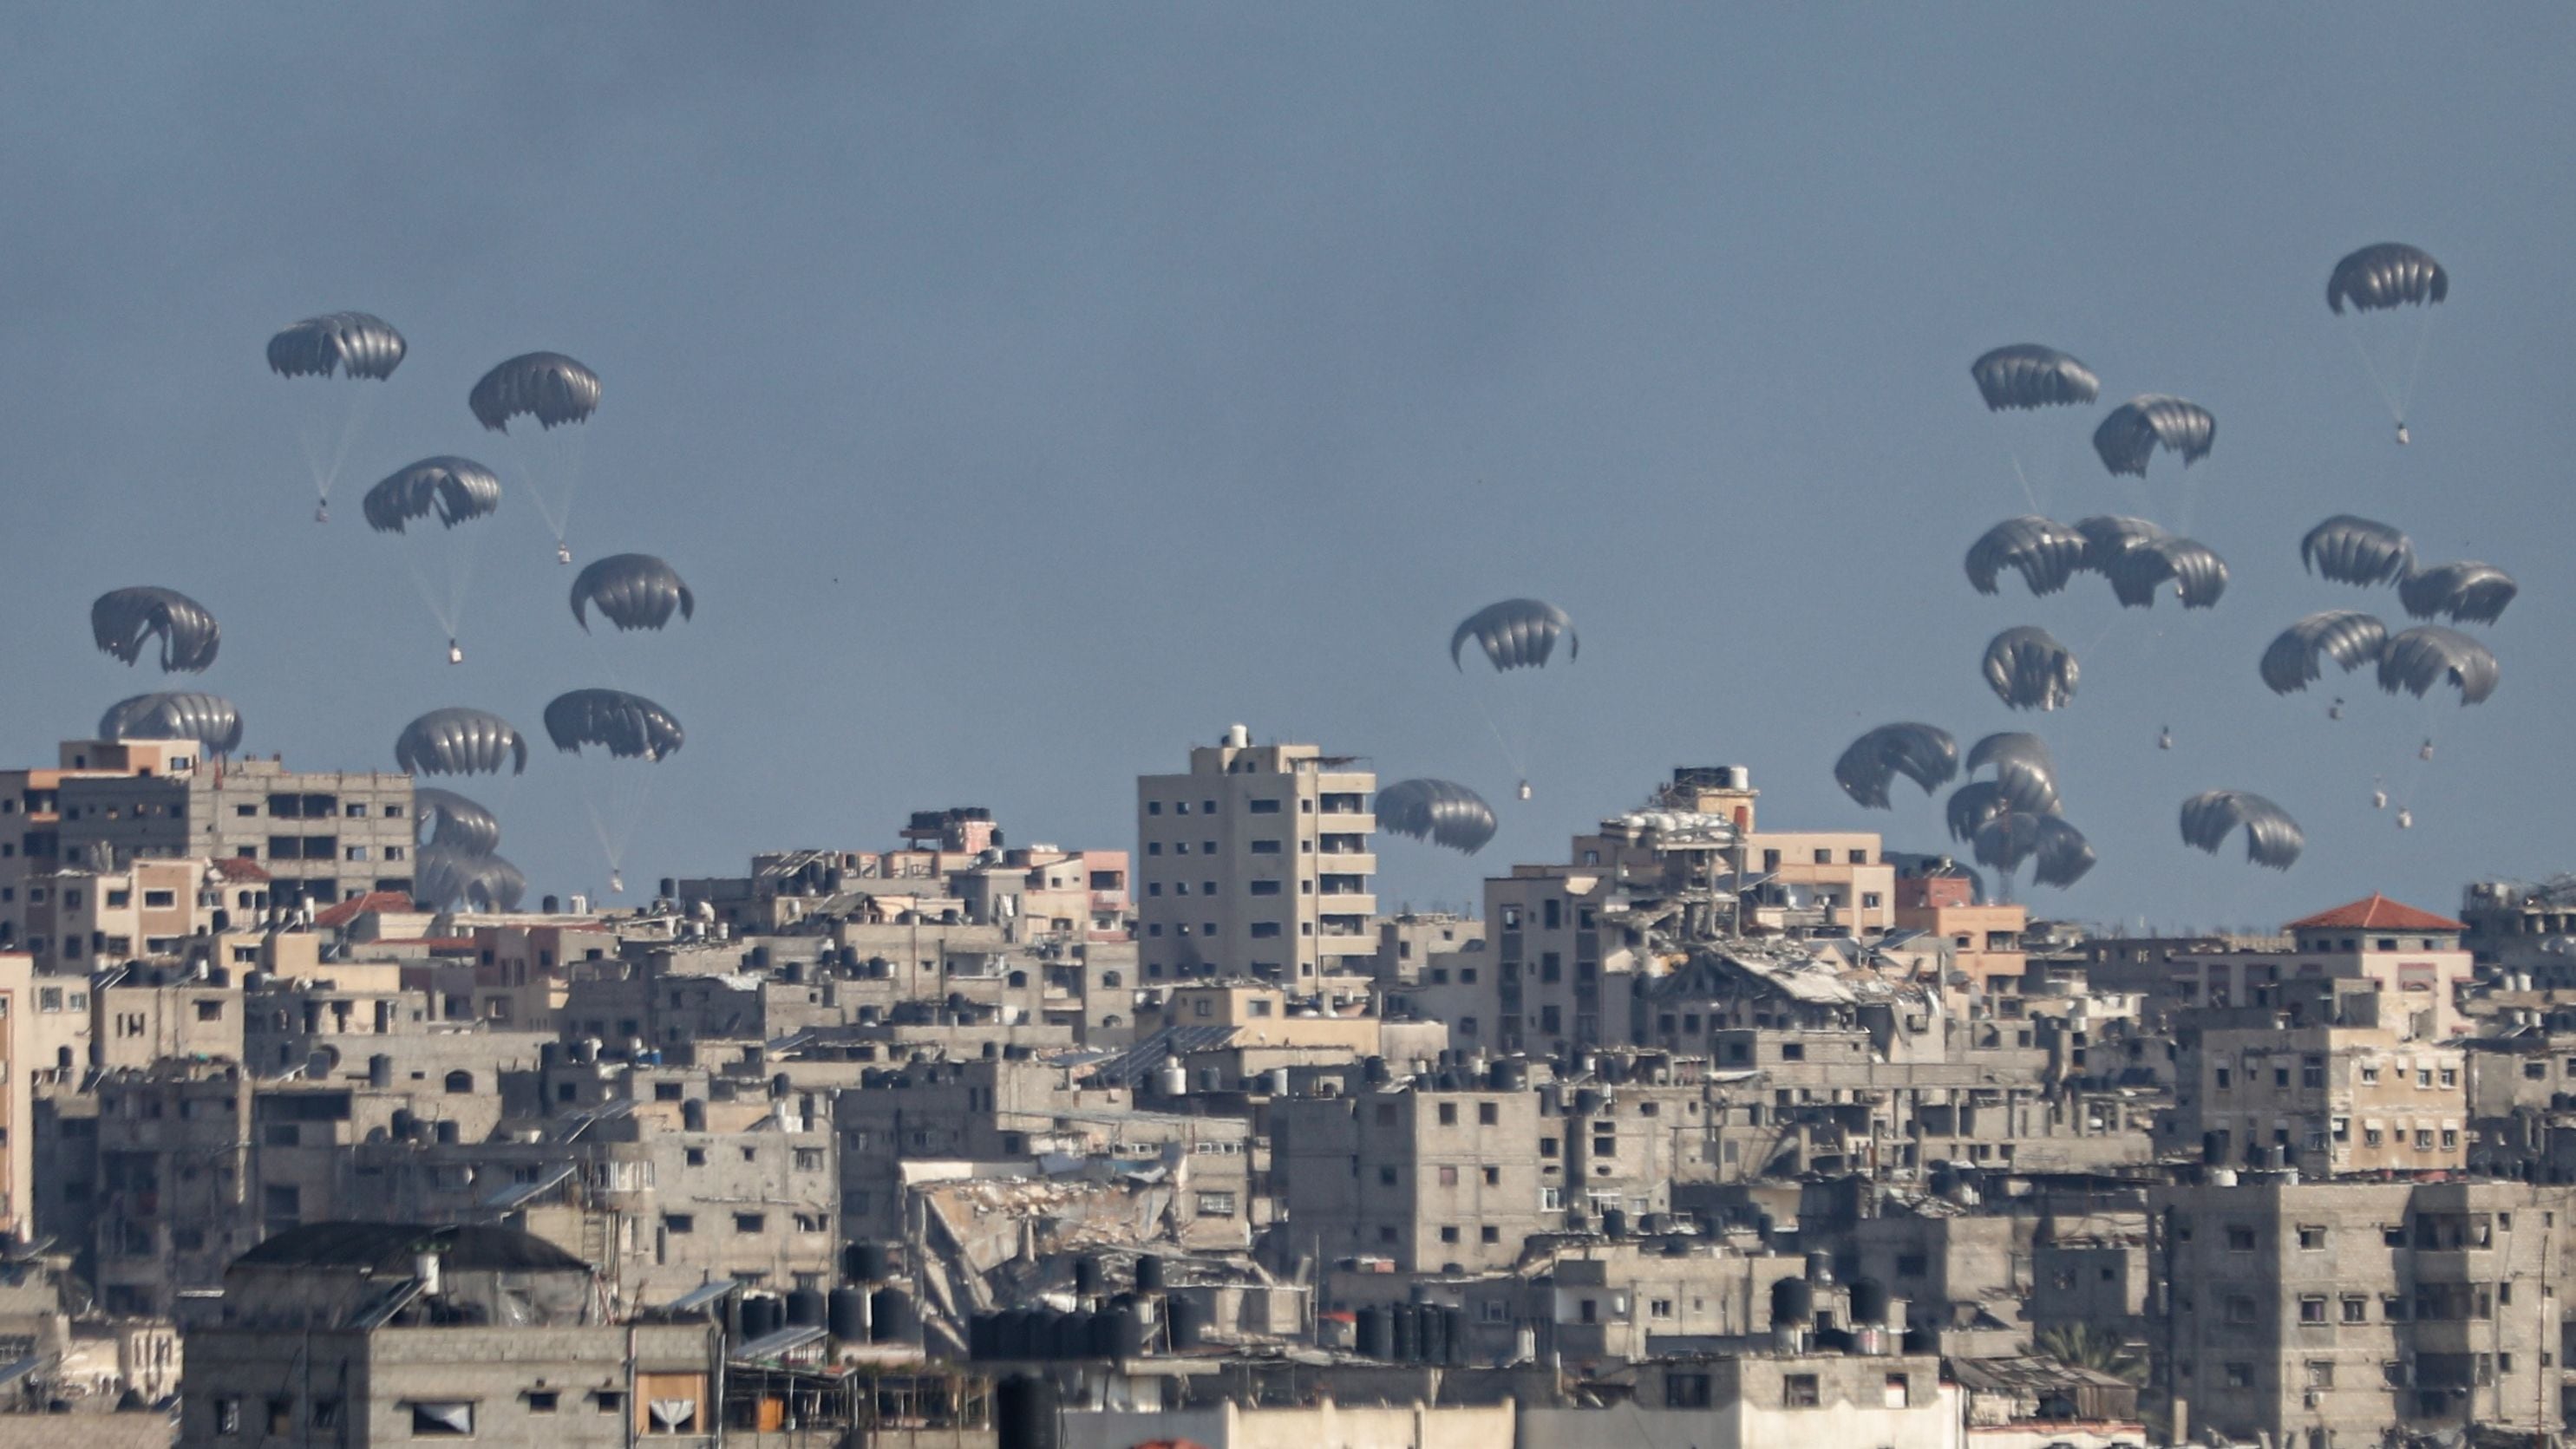 GAZA CITY, GAZA - APRIL 11: Humanitarian aid packages are seen landing by the help of parachutes after dropping from a plane as Israeli attacks continue on the second day of Eid al-Fitr in Gaza City, Gaza on Arpil 11, 2024. (Photo by Dawoud Abo Alkas/Anadolu via Getty Images)